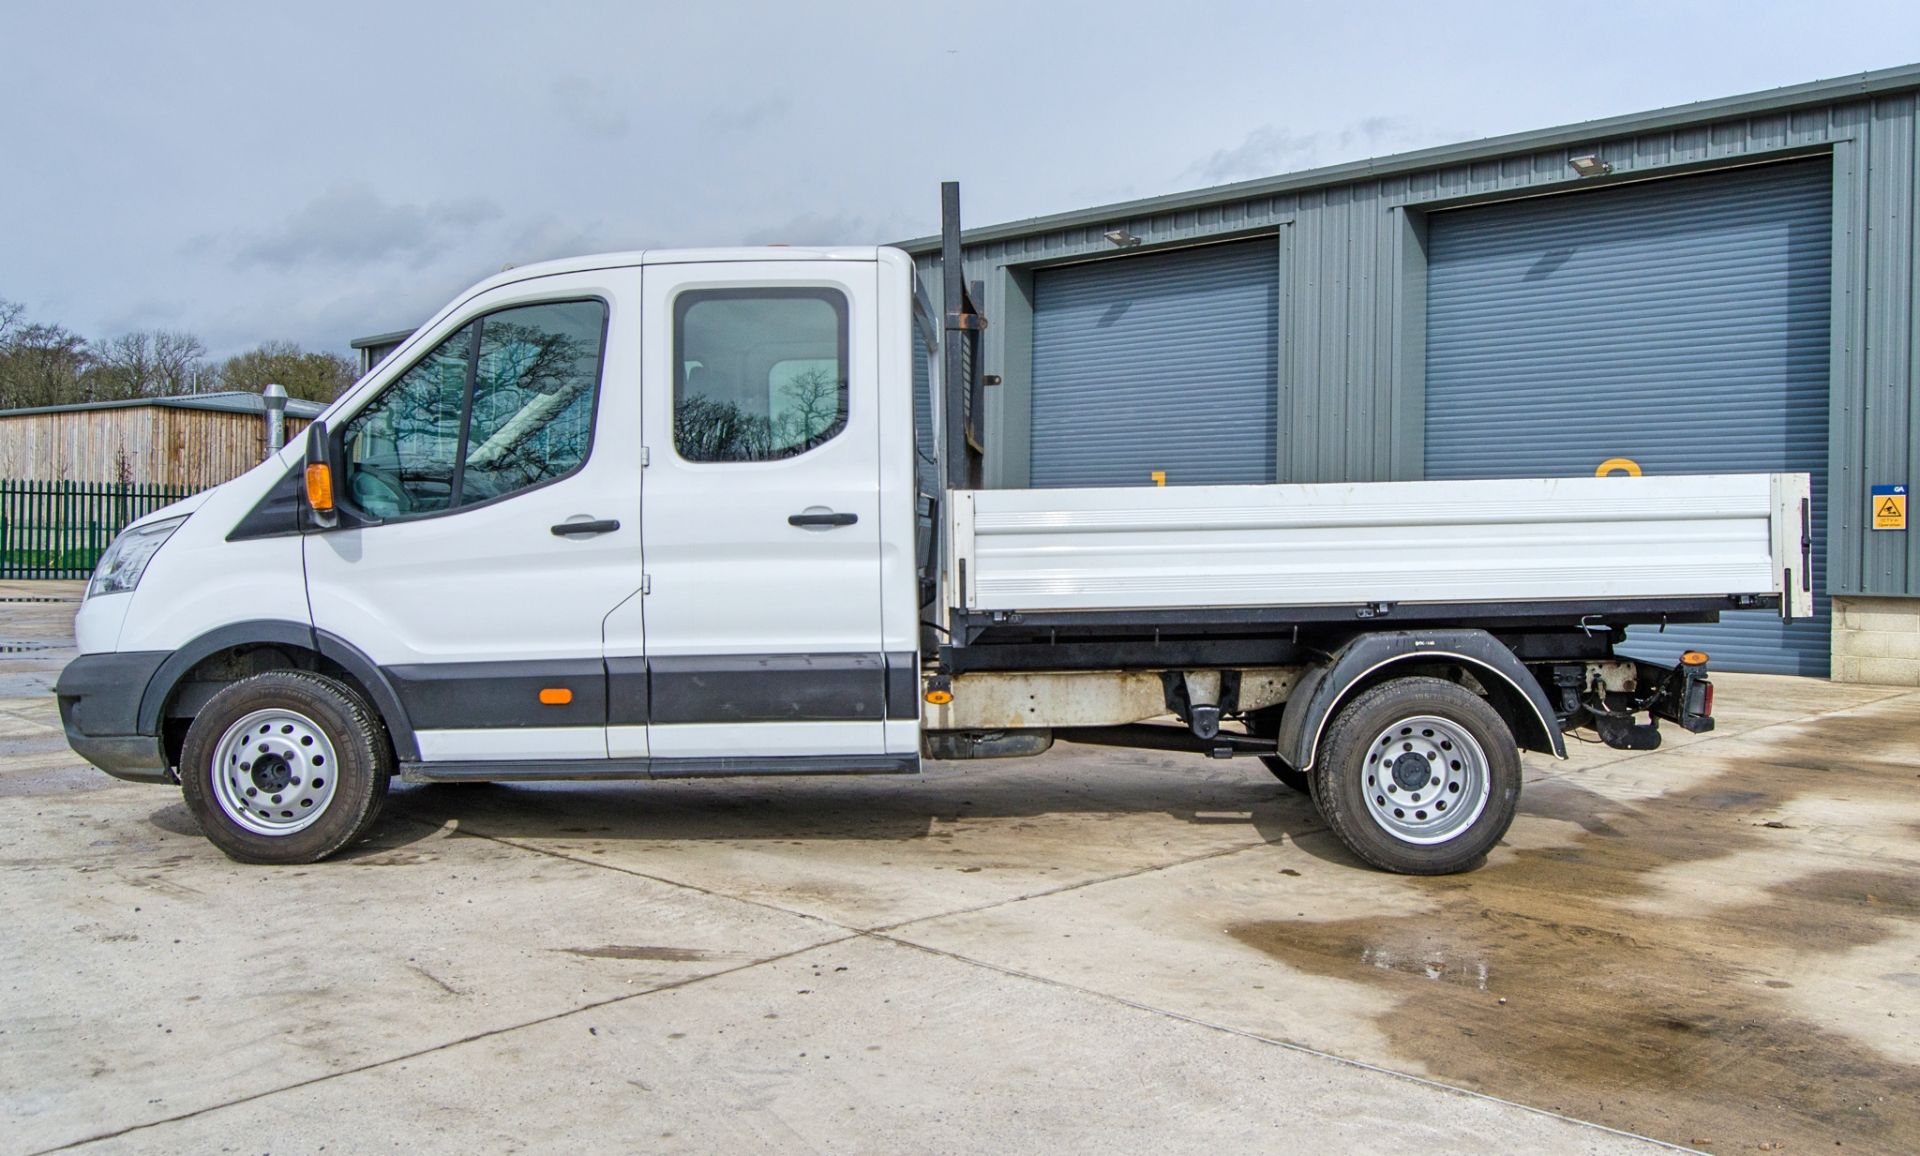 Ford Transit 350 2198cc 6 speed manual crew cab tipper  Registration Number: FP65 DHD Date of - Image 8 of 35